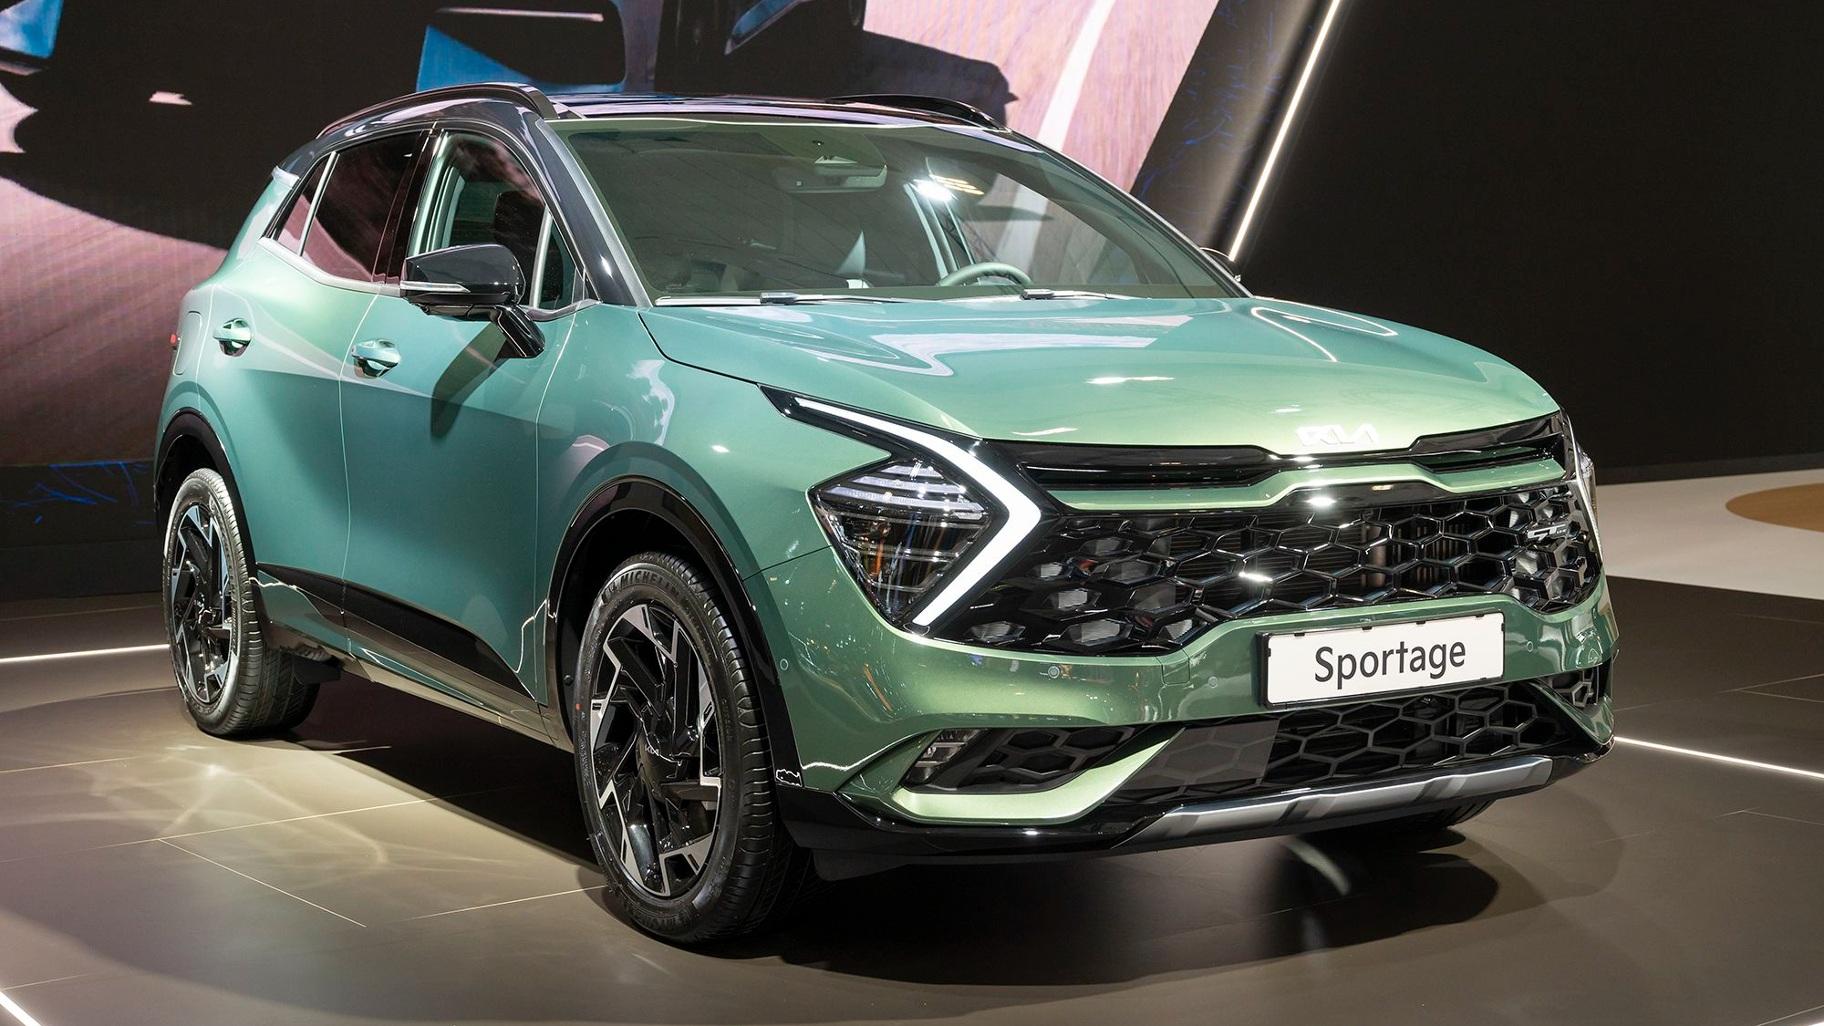 The Kia Sportage compact SUV is pictured. (Sjoerd van der Wal / Getty Images)